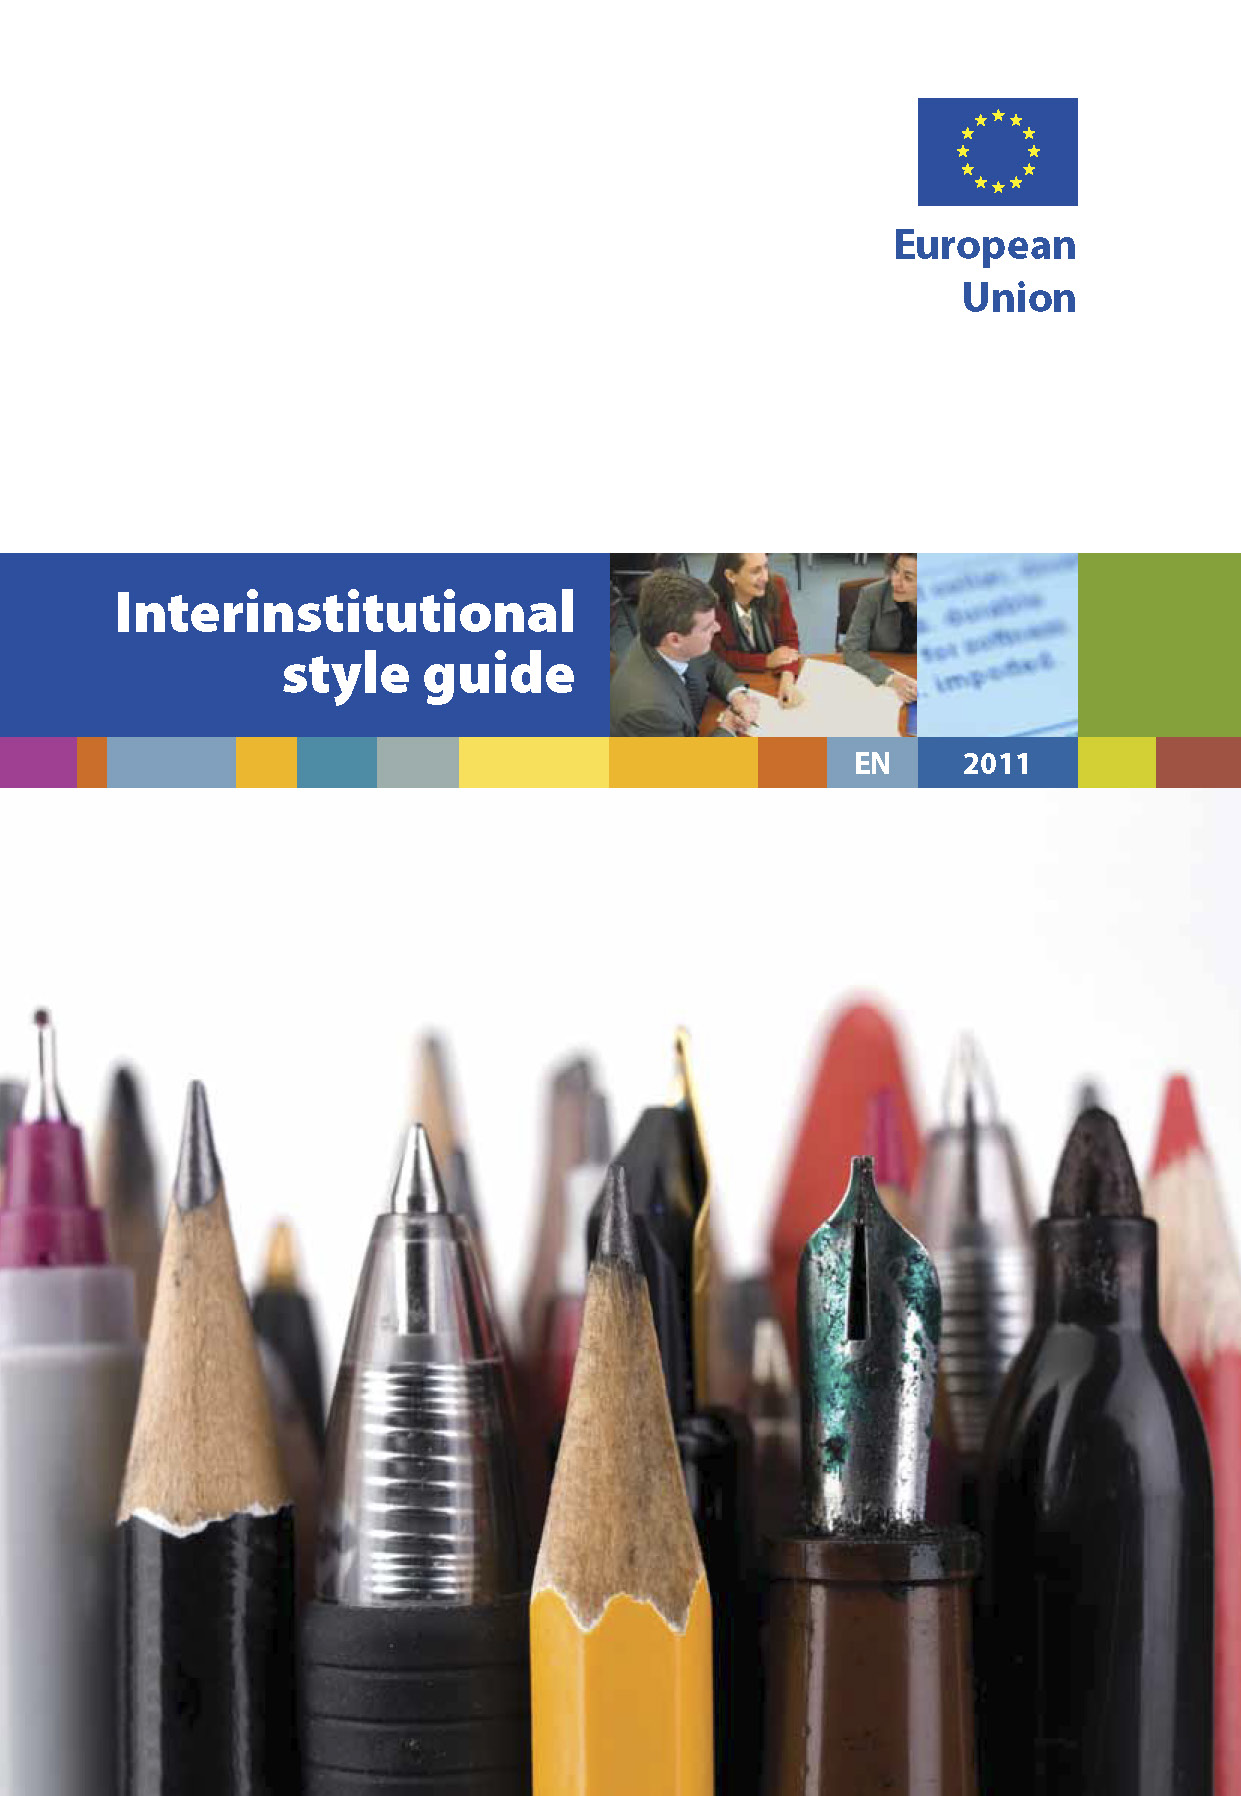 EU publications: Interinstitutional style guide 2011